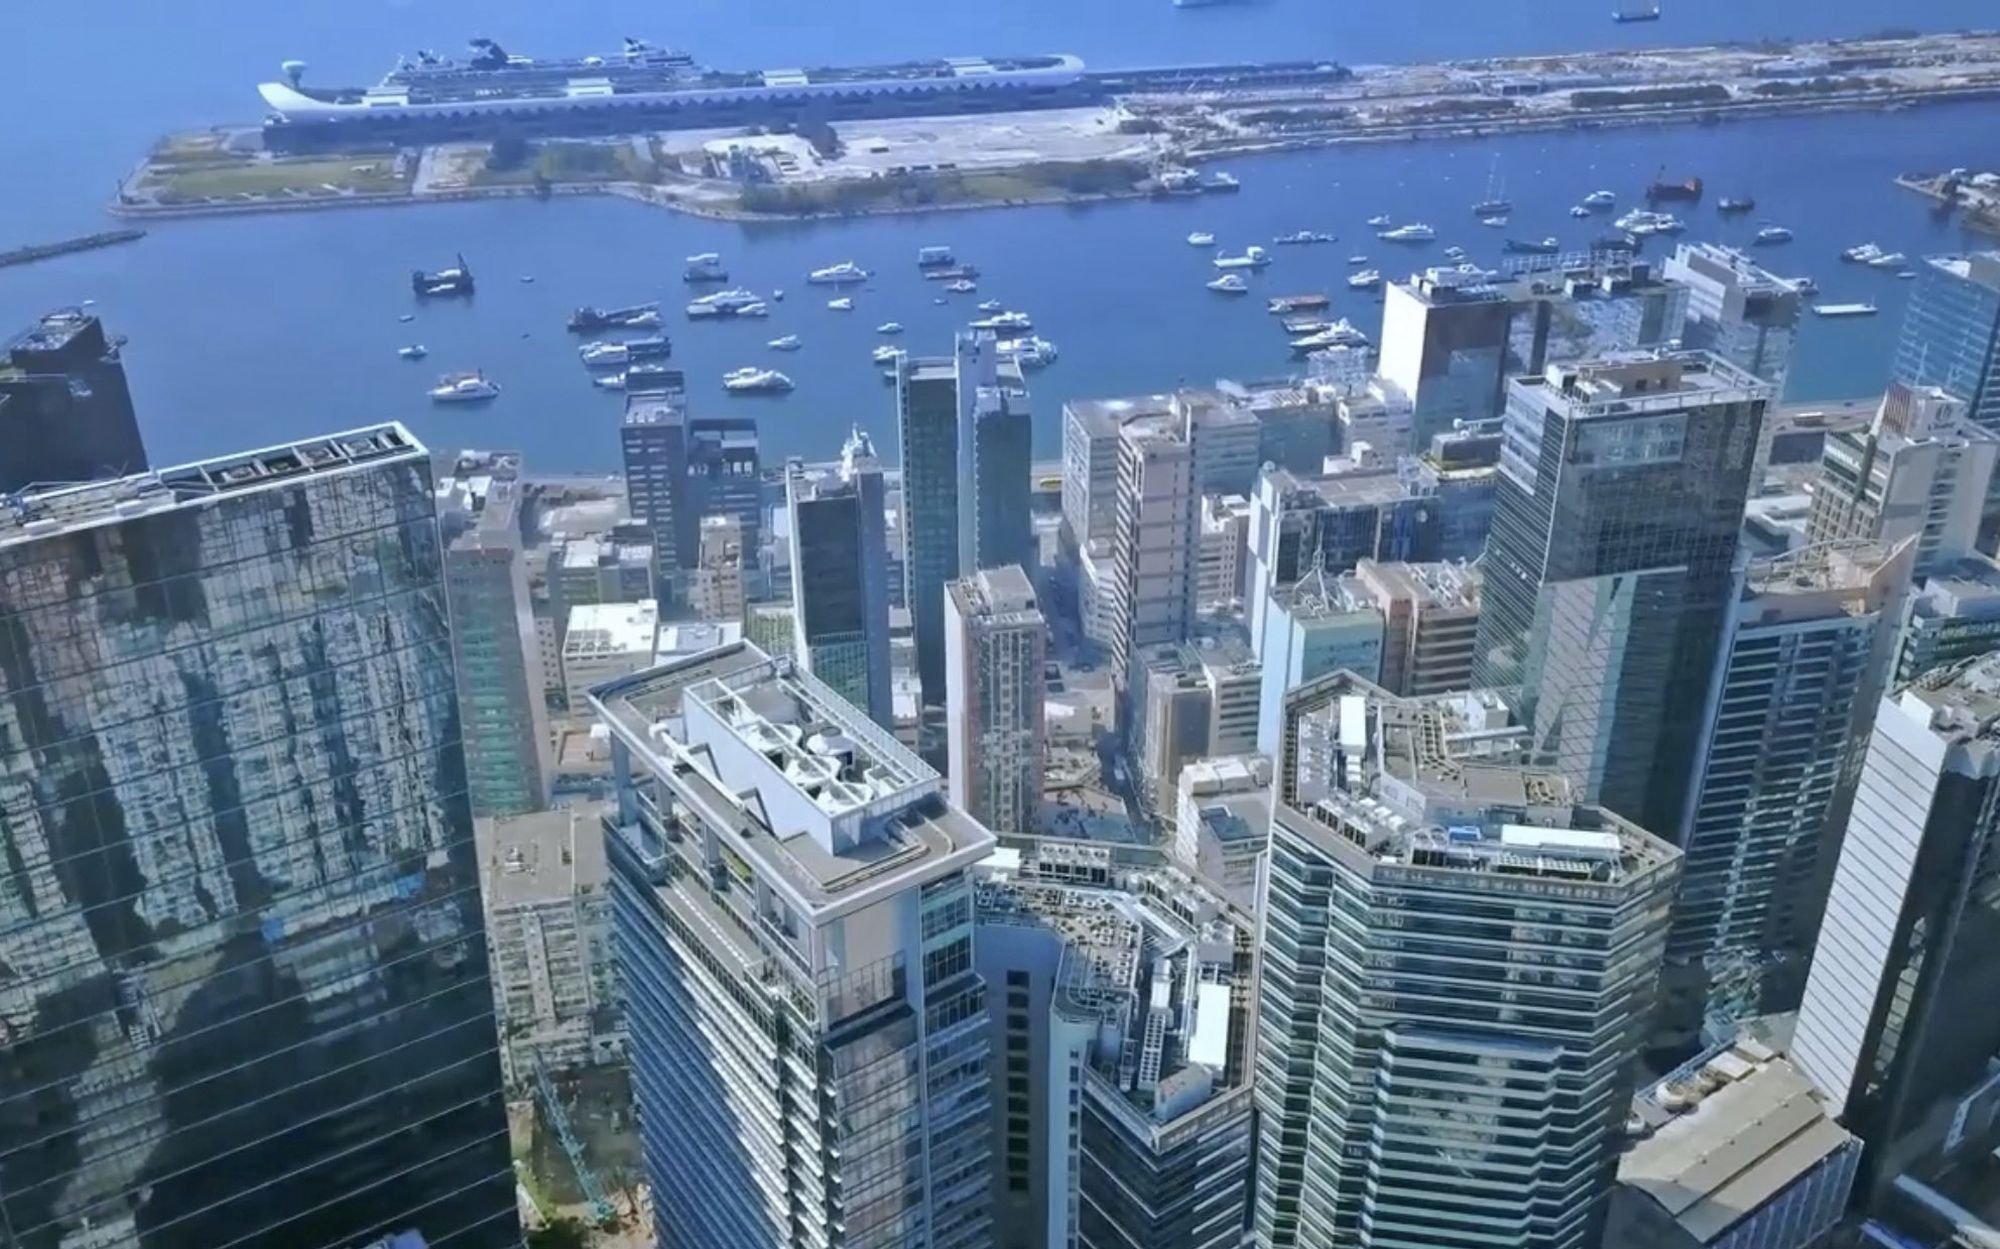 The EKE initiative has successfully transformed the old industrial areas in KE and the site of the former Kai Tak Airport into Hong Kong’s second CBD gradually, with a substantial increase in the total commercial floorspace in the district by about 70 percent from about 1.7 million square metres in 2012 to 2.9 million square metres at present, and it will reach about 3.9 million square metres taking into account projects under construction or granted with relevant approvals. 